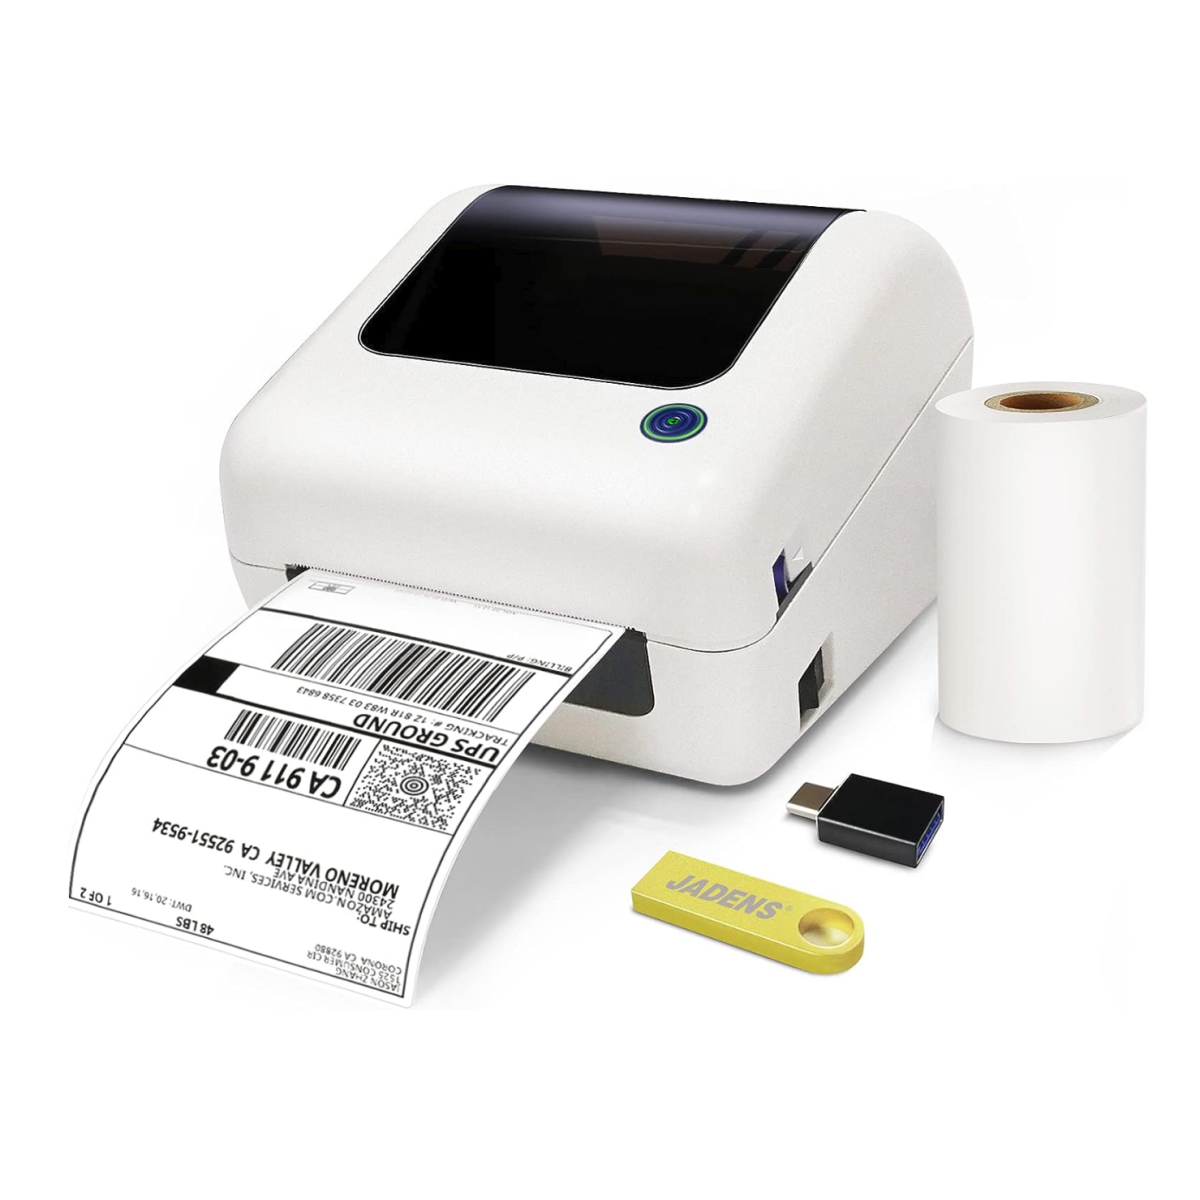 A Jadens Thermal Shipping Label Printer with included U-disk and labels